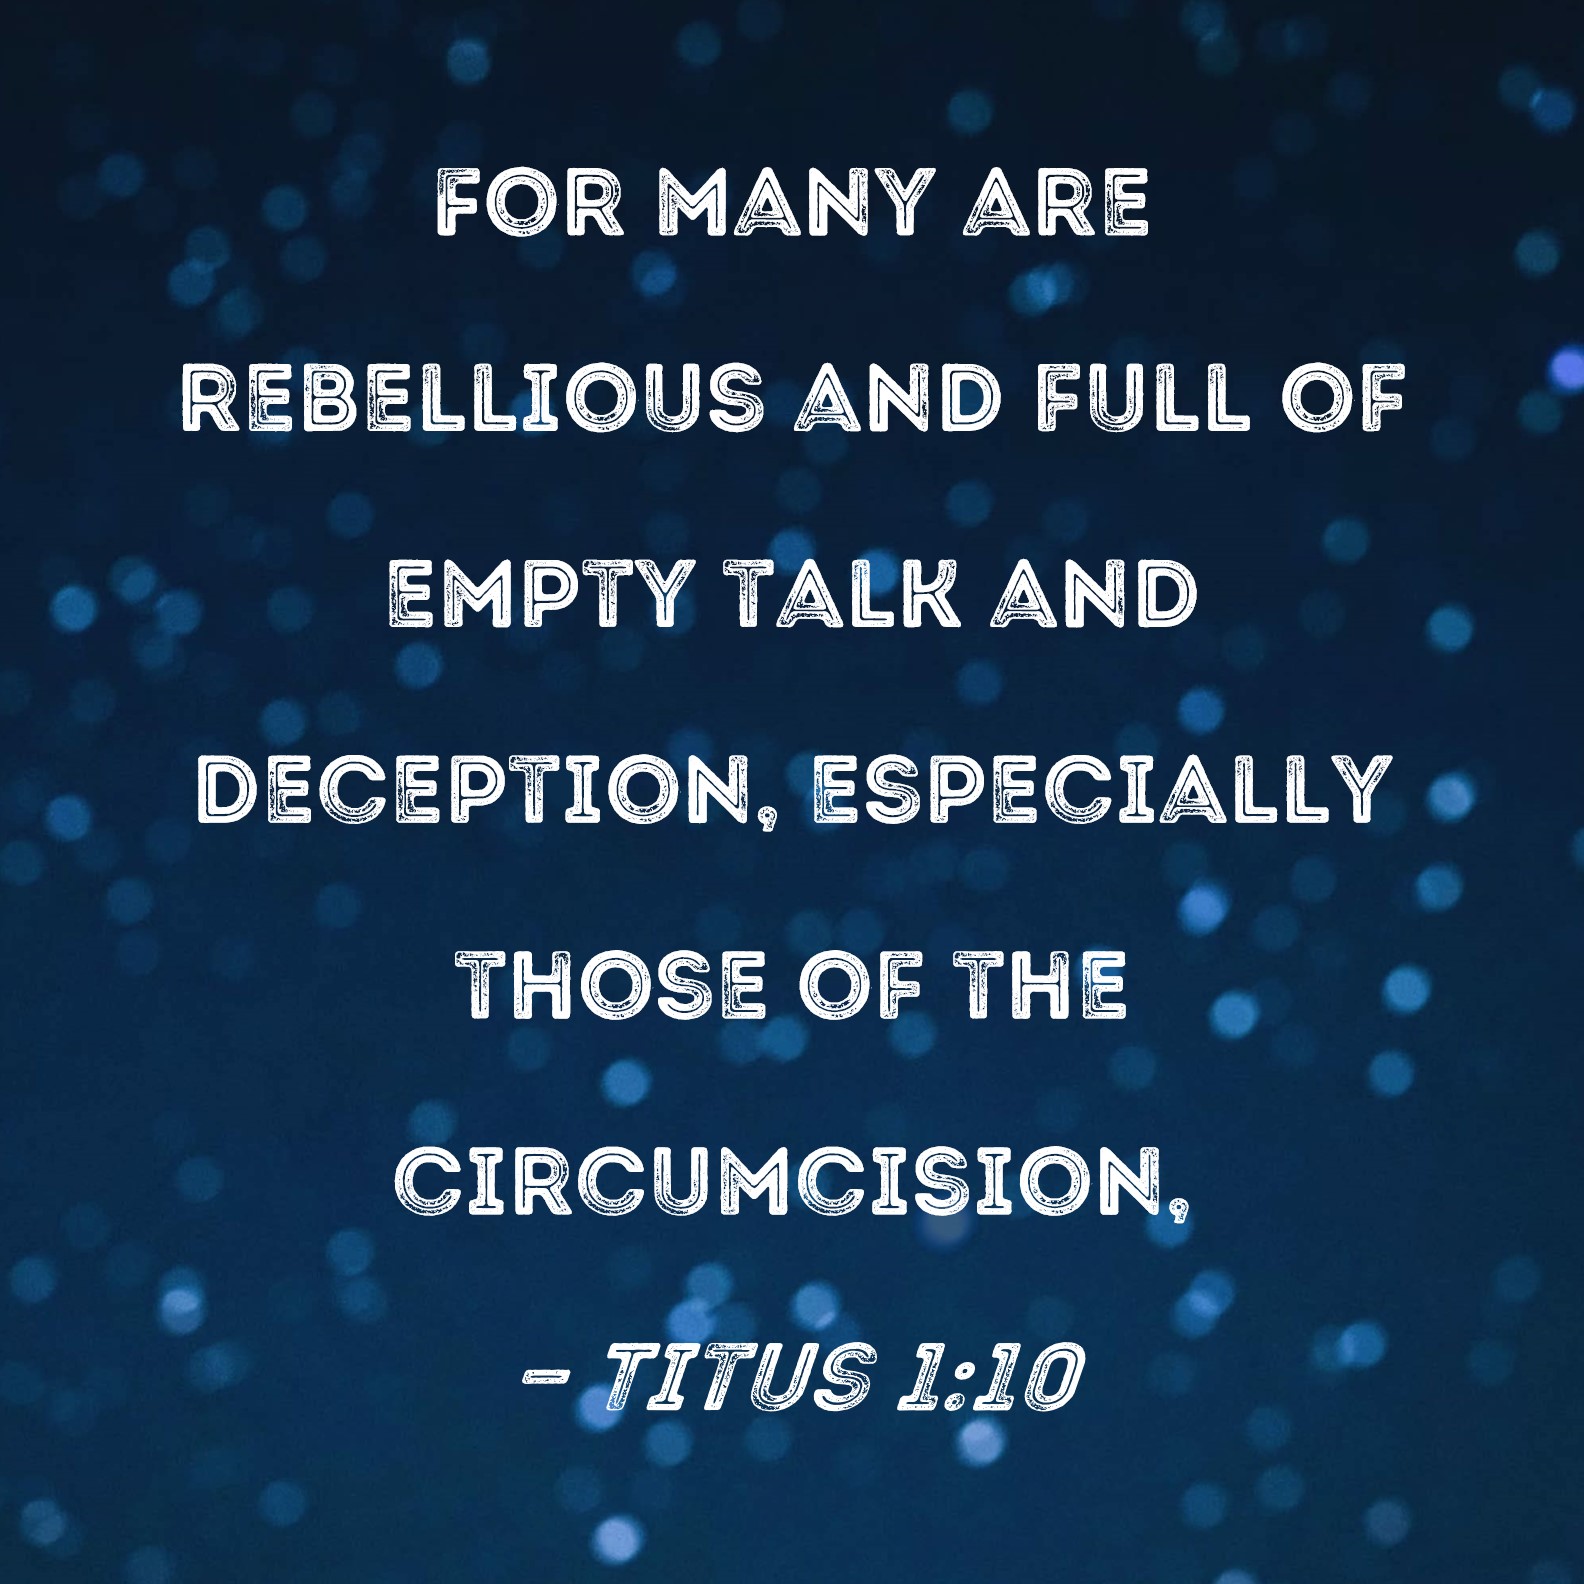 Titus 1:10 For many are rebellious and full of empty talk and deception ...